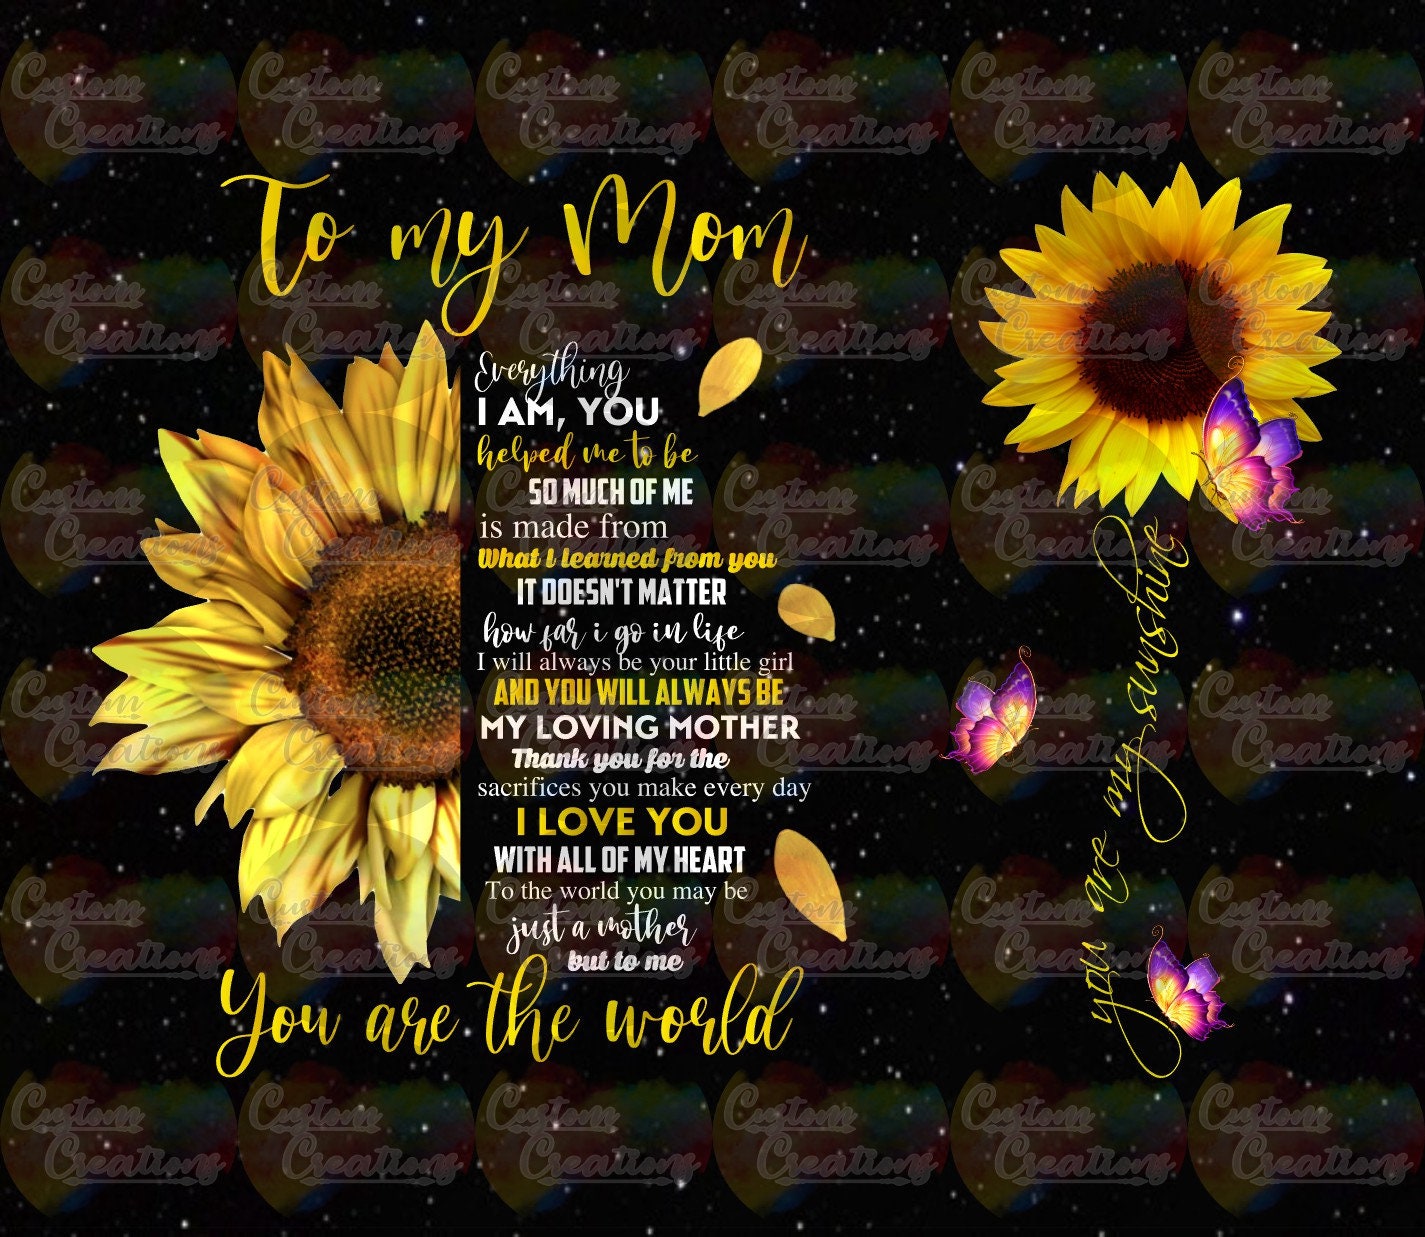 To My Mom You Are The World I Love You You Are My Sunshine Sunflower Full Cup Wrap 9.5" x 8.25" Waterslide Ready to Apply